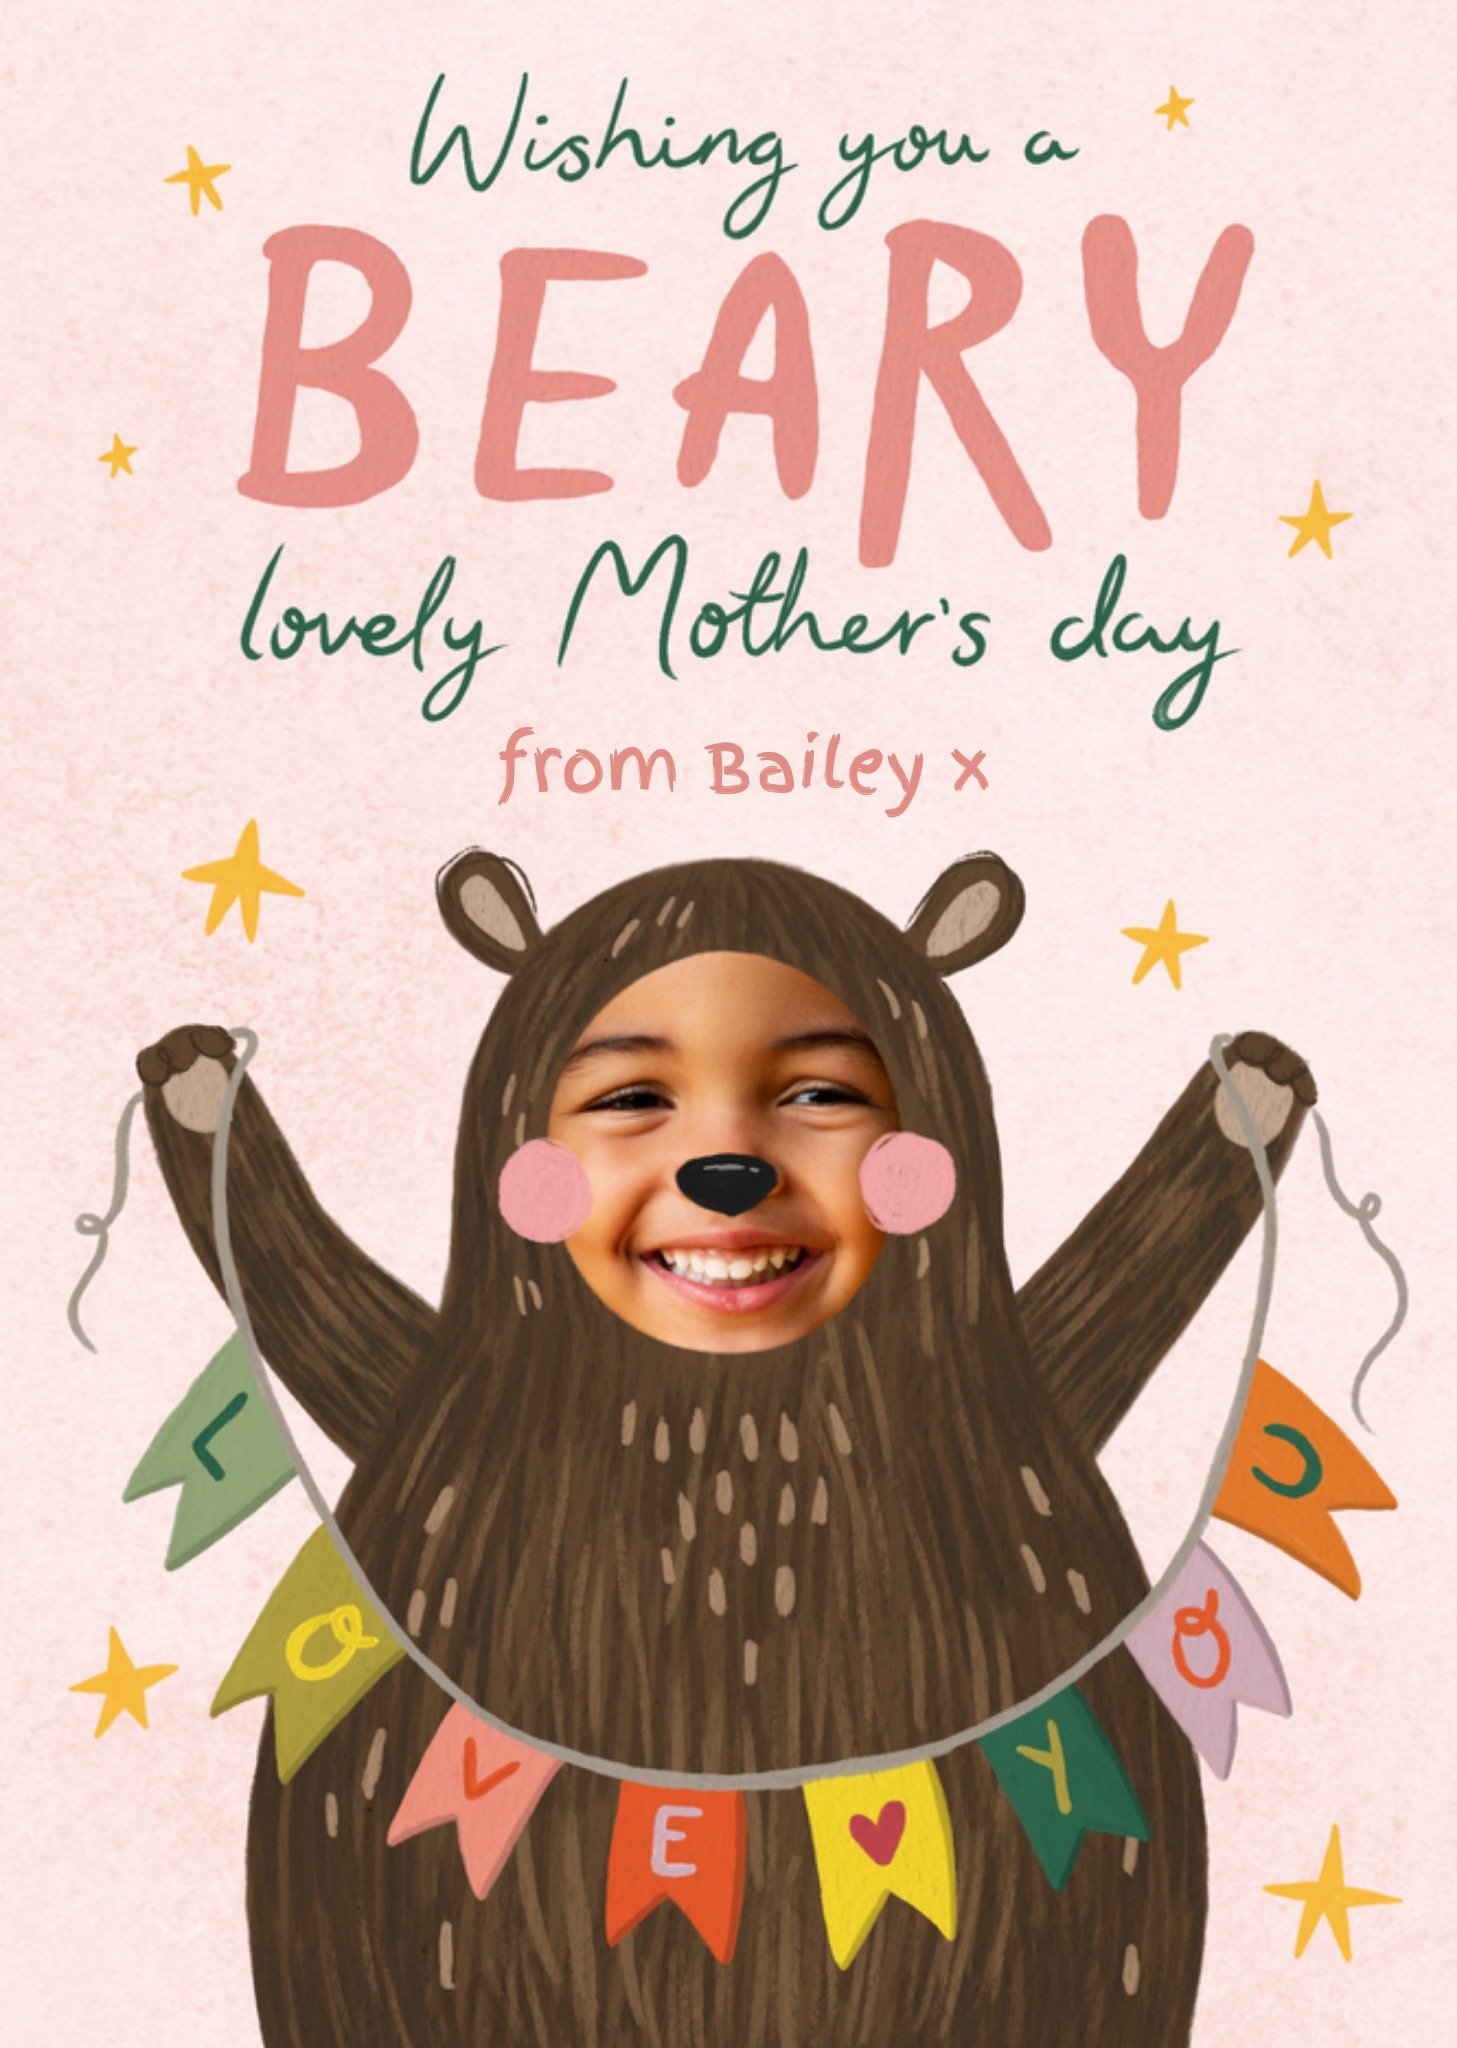 Moonpig From Your Bear Cub Face In Hole Photo Upload Beary Lovely Mother's Day Card Ecard